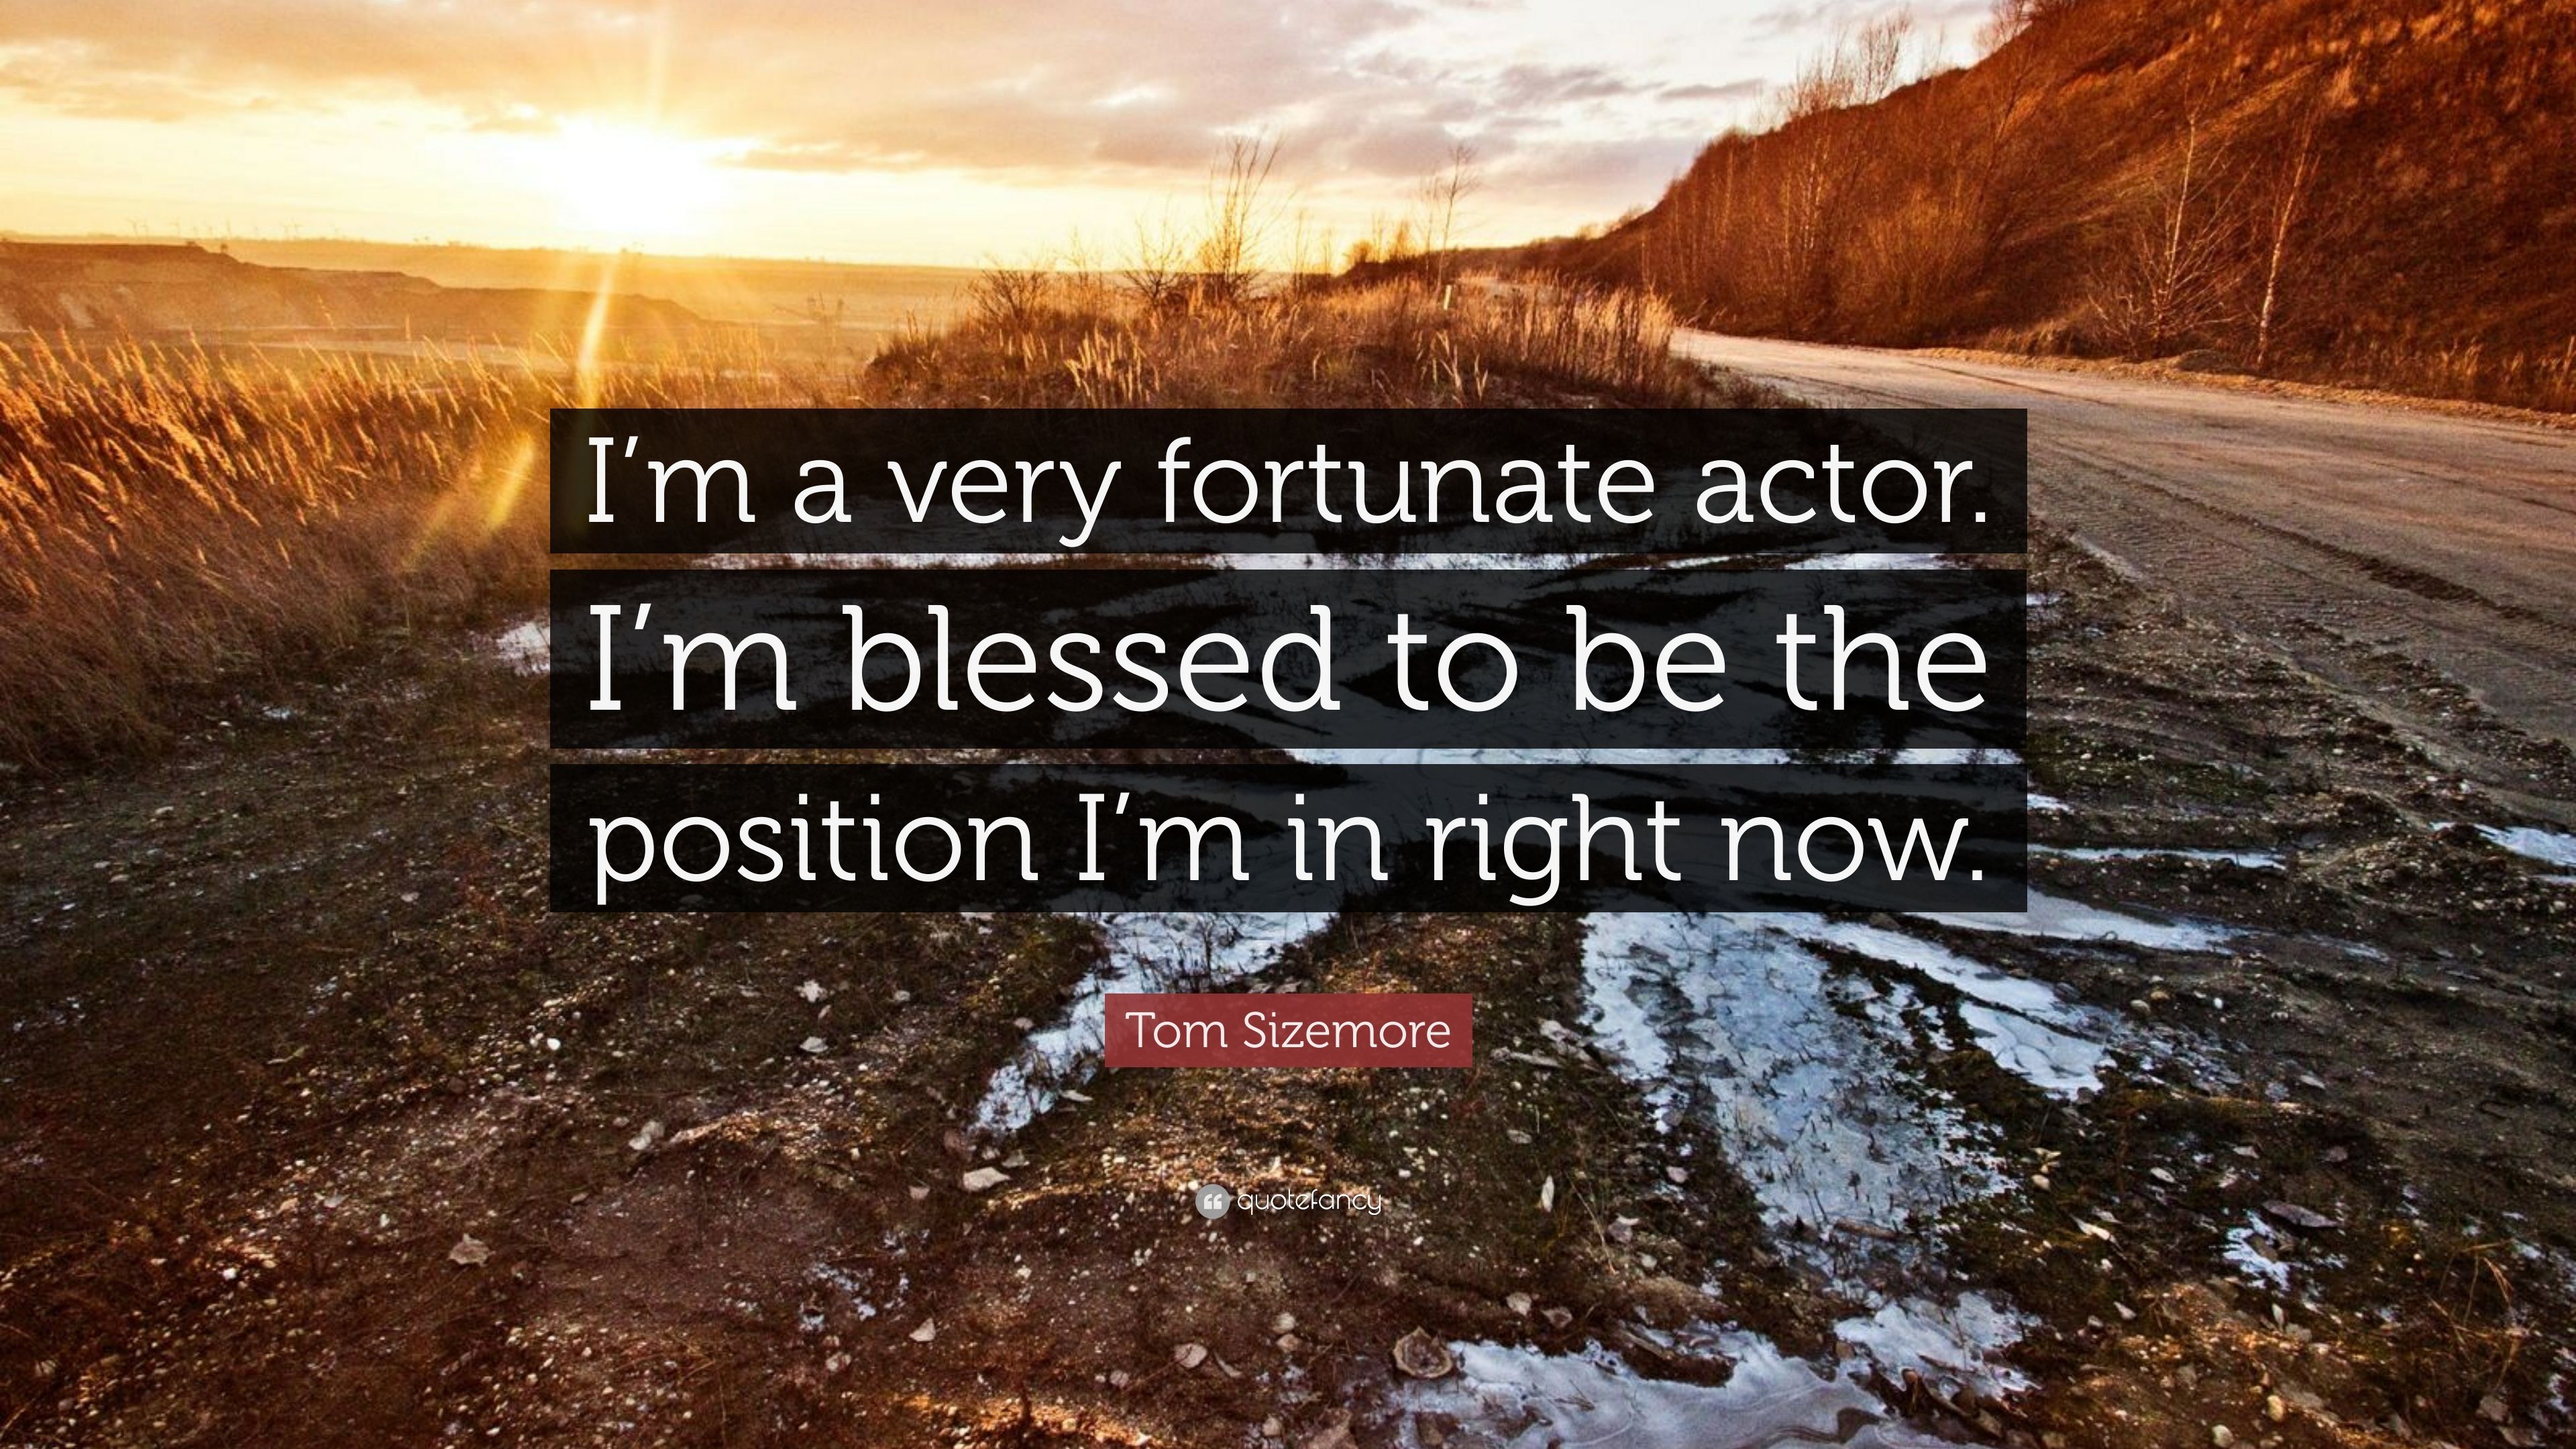 Tom Sizemore Quote: “I'm a very fortunate actor. I'm blessed to be